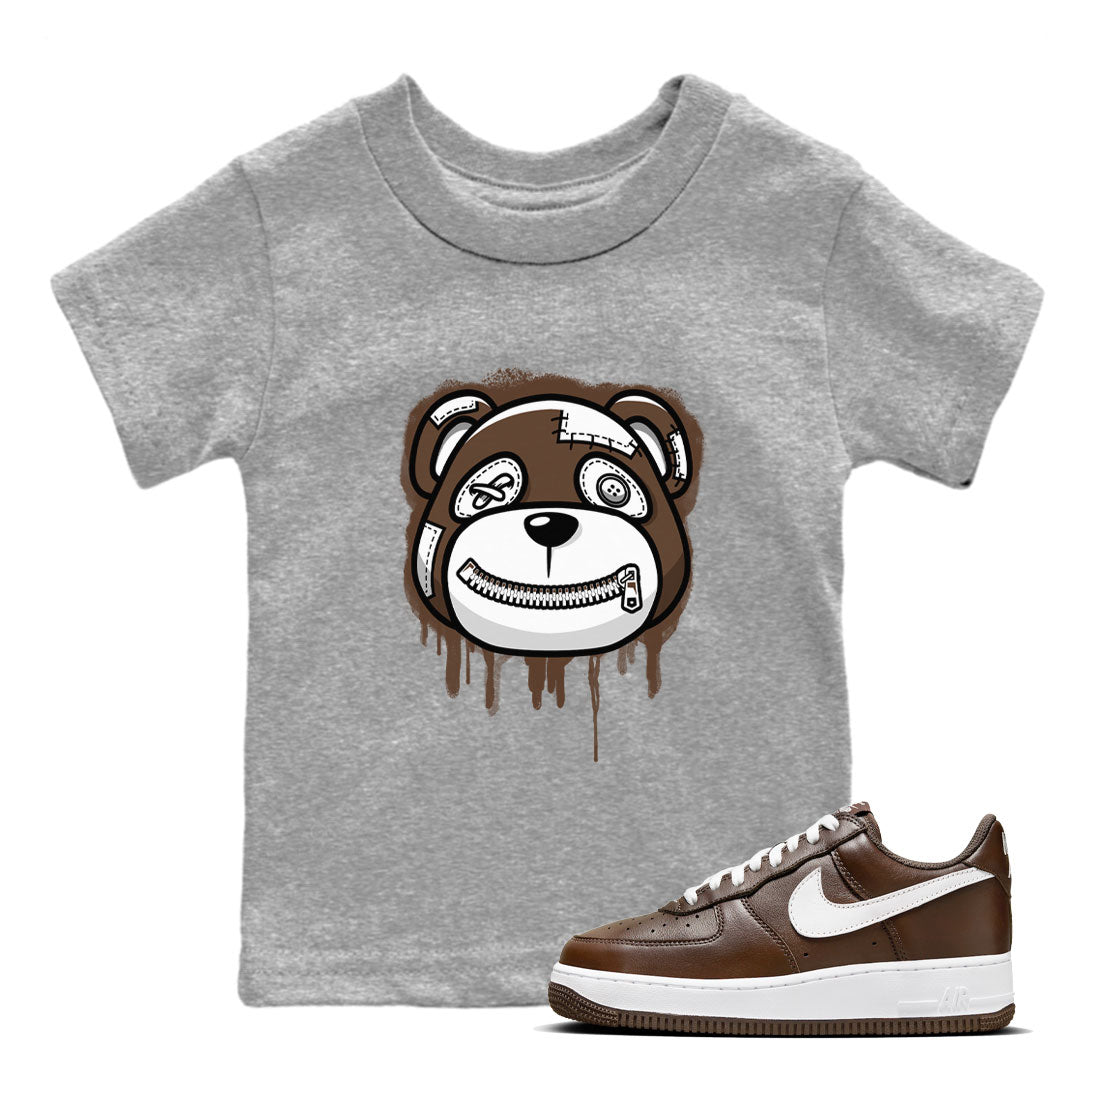 AF1 Chocolate shirt to match jordans Bear Face sneaker tees Air Force 1 Chocolate SNRT Sneaker Tees Youth Kid's Baby Shirt Heather Grey 1 T-Shirt